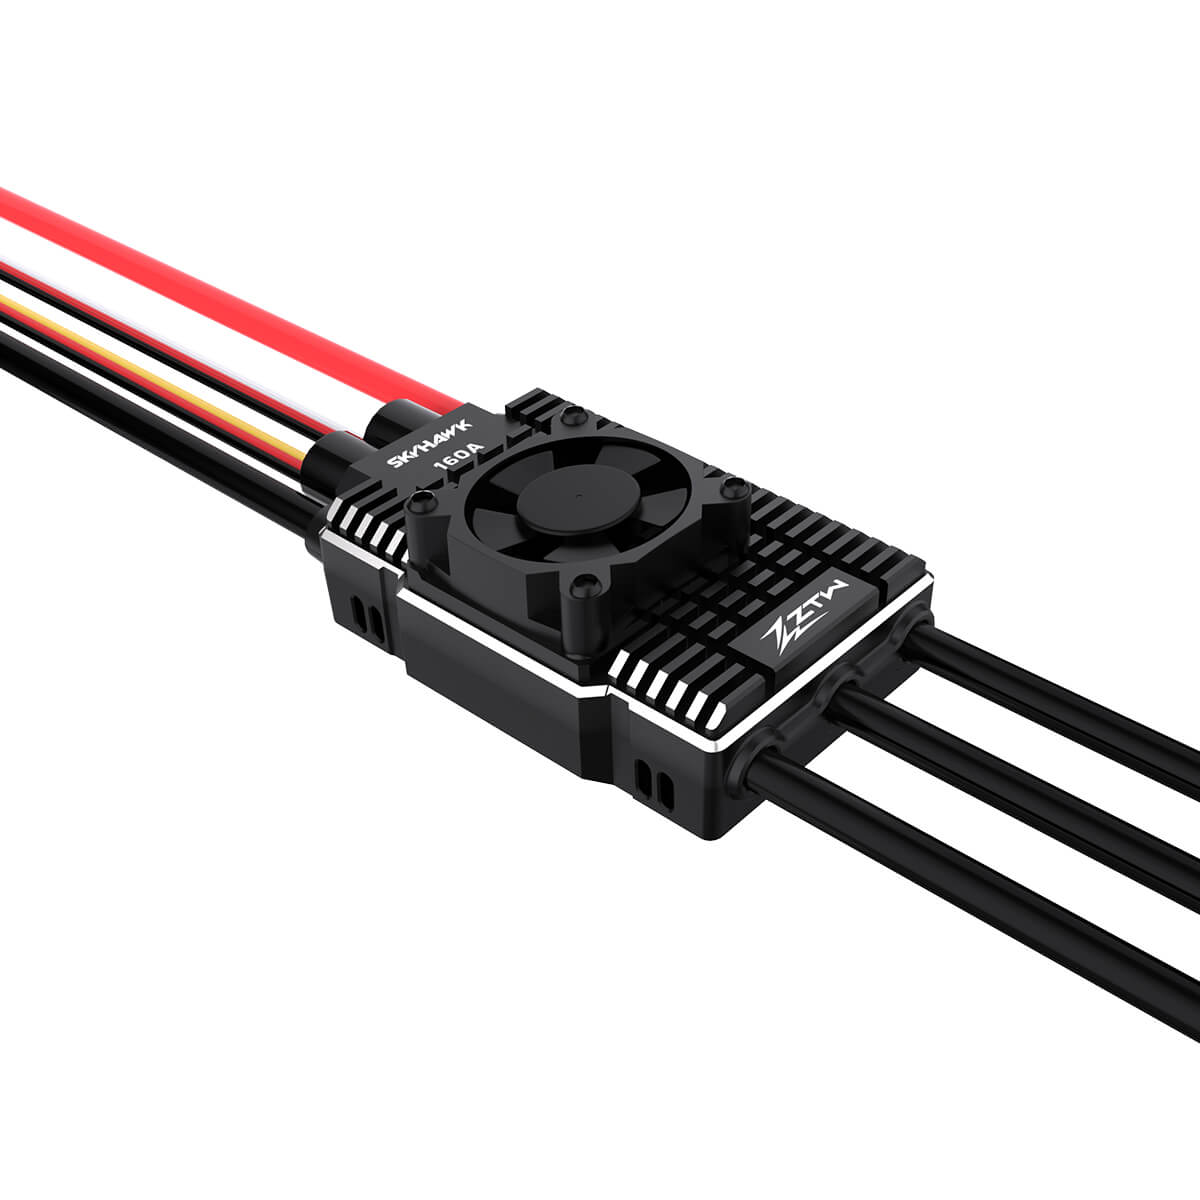 ZTW Skyhawk 160A ESC HV 6-14S SBEC For RC Helicopter